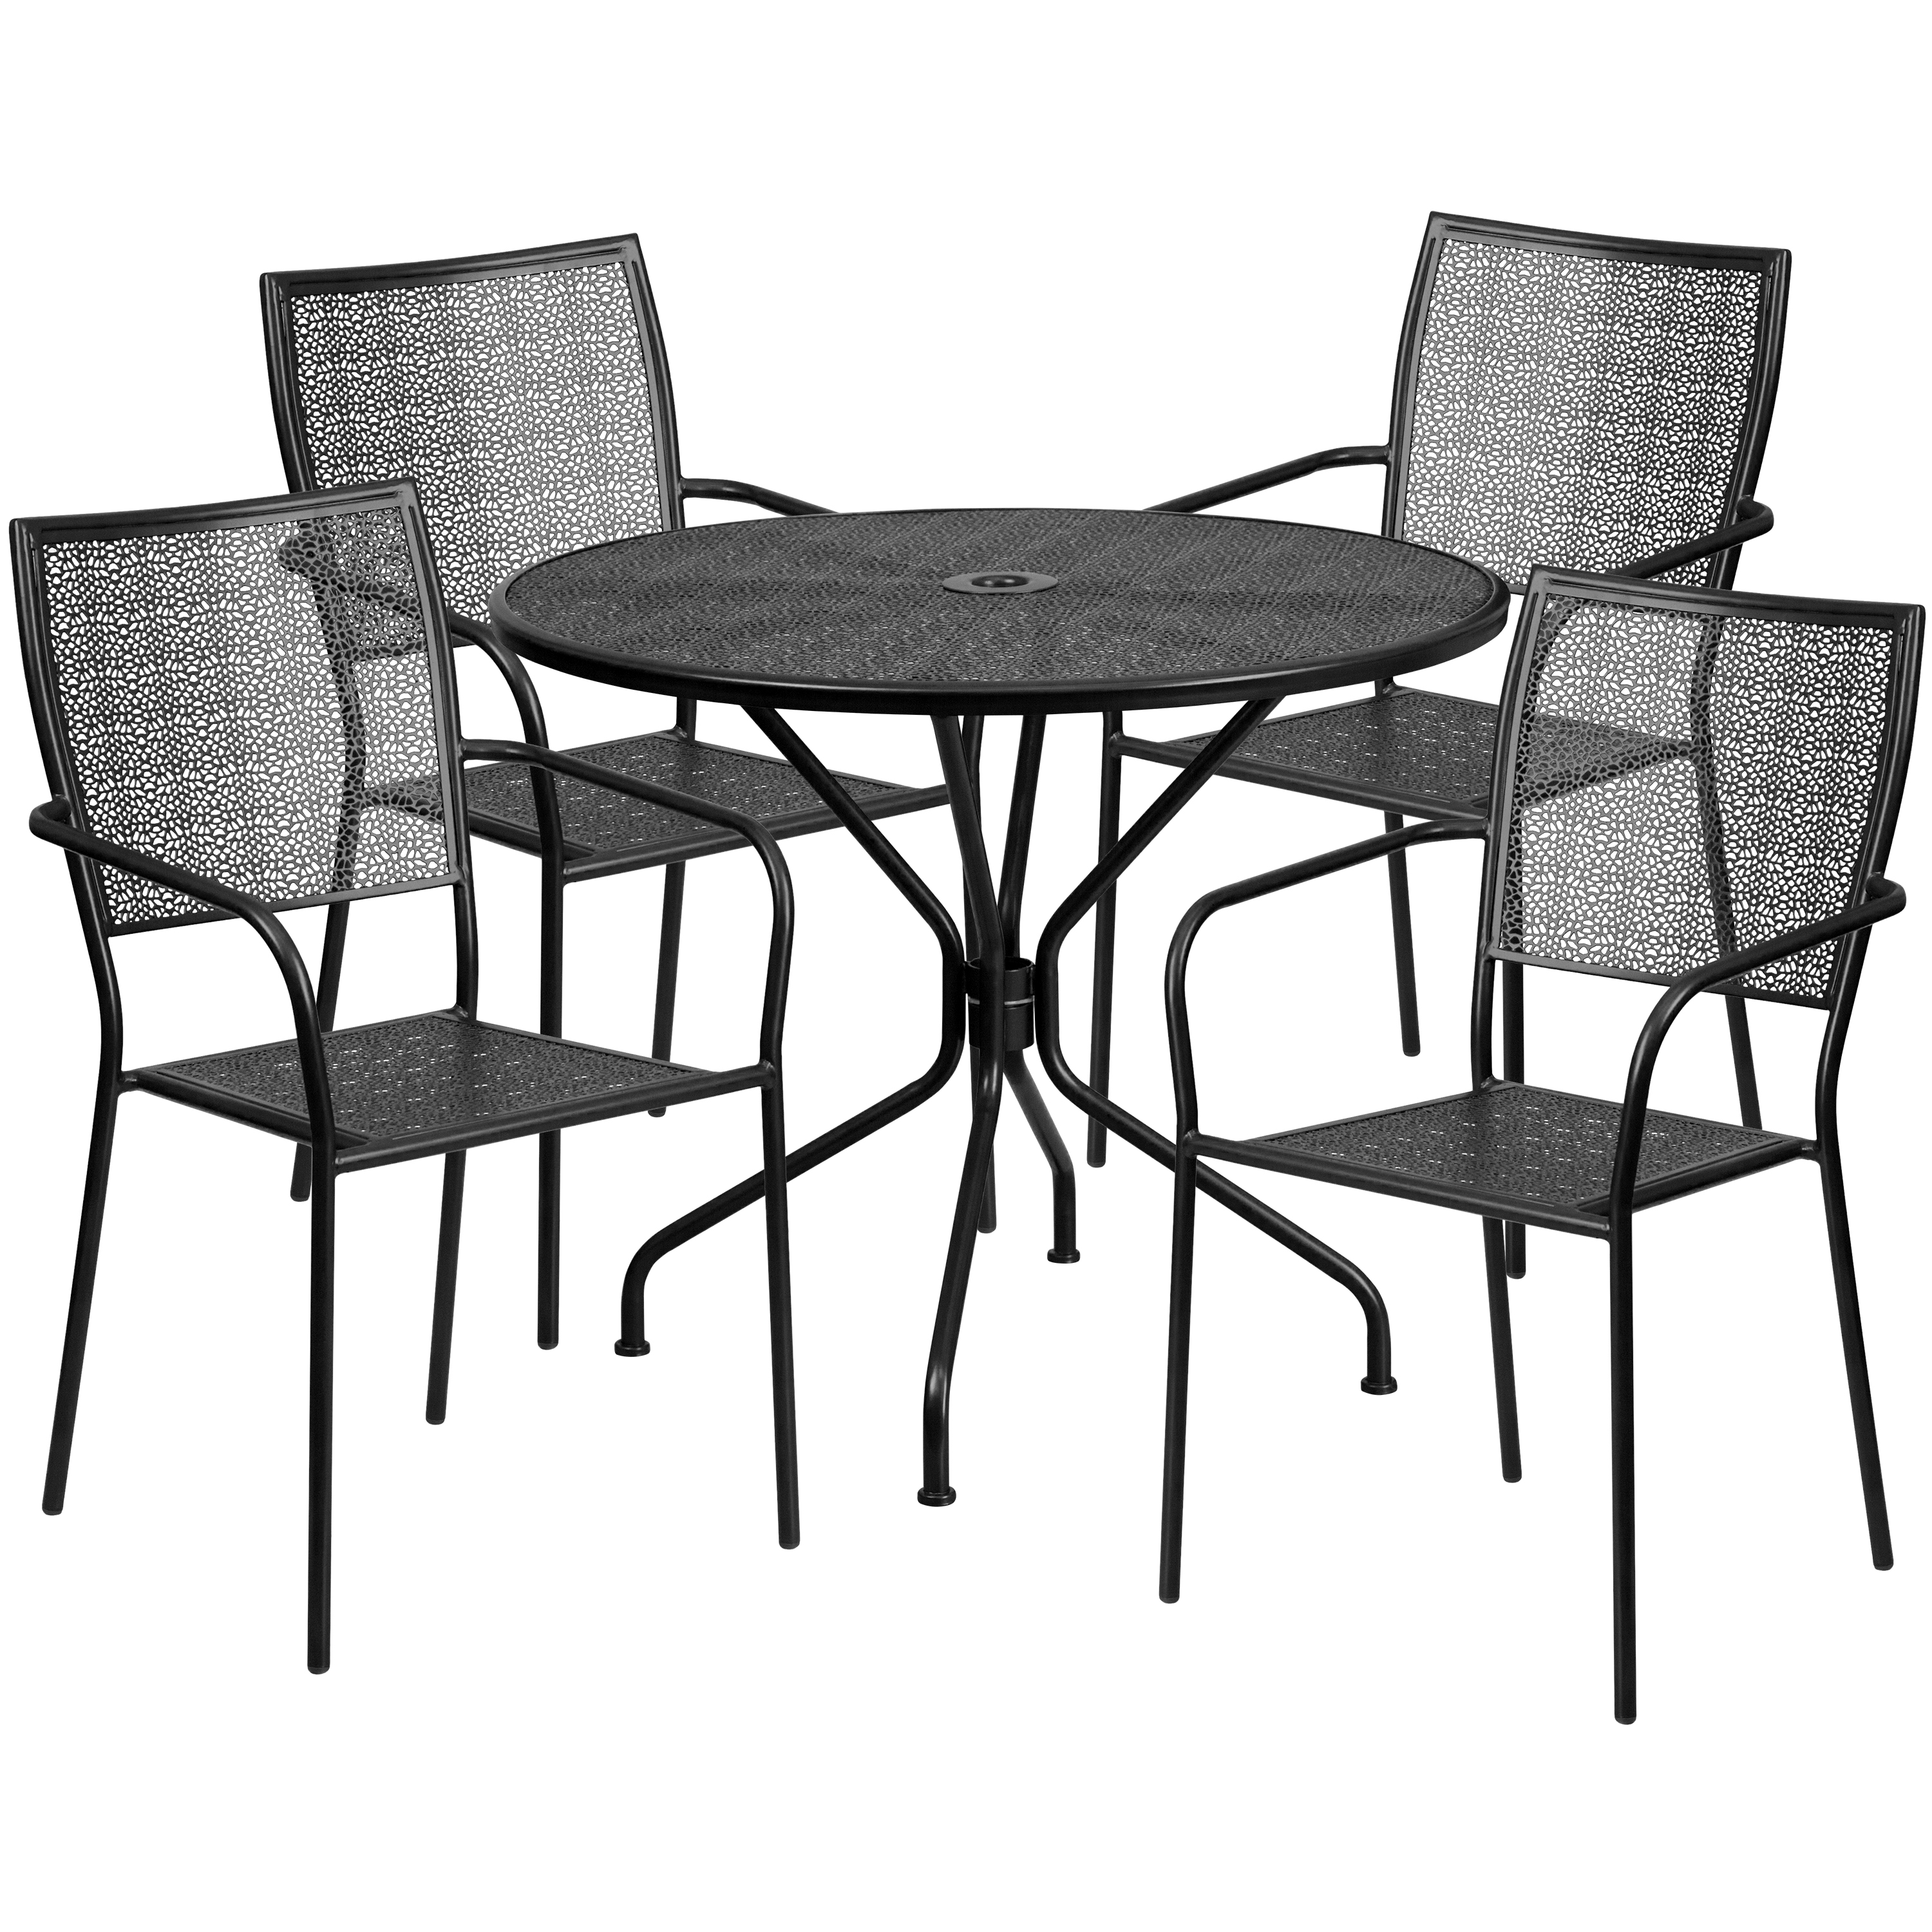 Flash Furniture Commercial Grade 35.25" Round Black Indoor-Outdoor Steel Patio Table Set with 4 Square Back Chairs - image 2 of 5